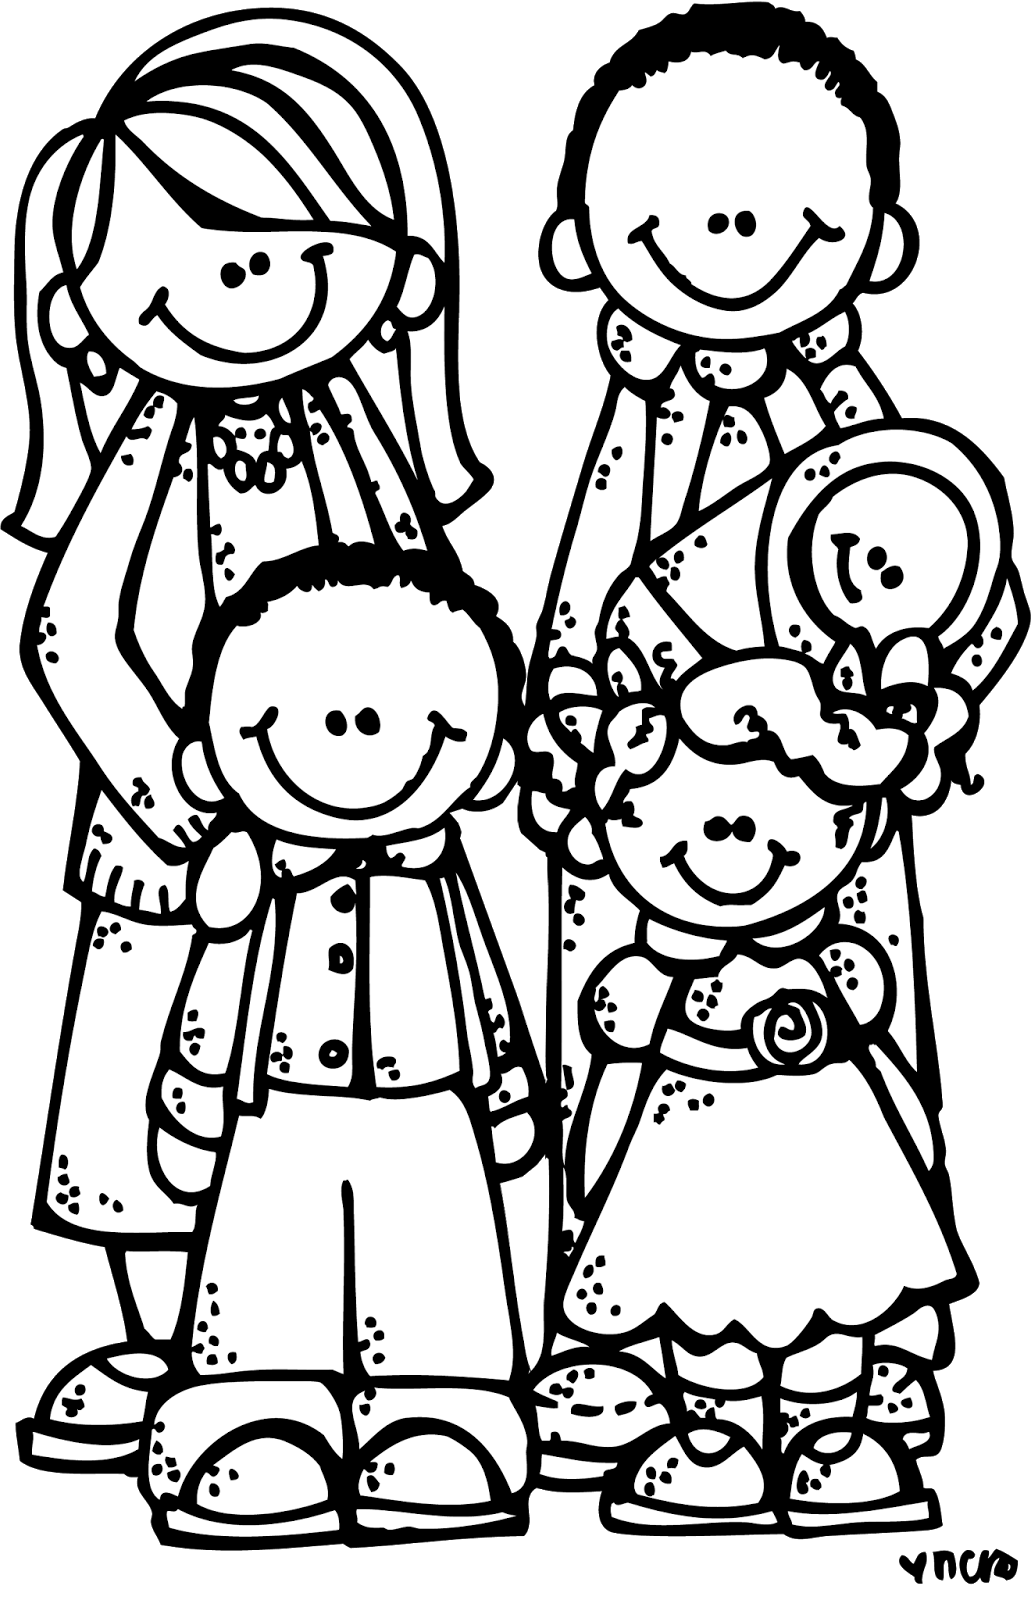 family day clipart black and white